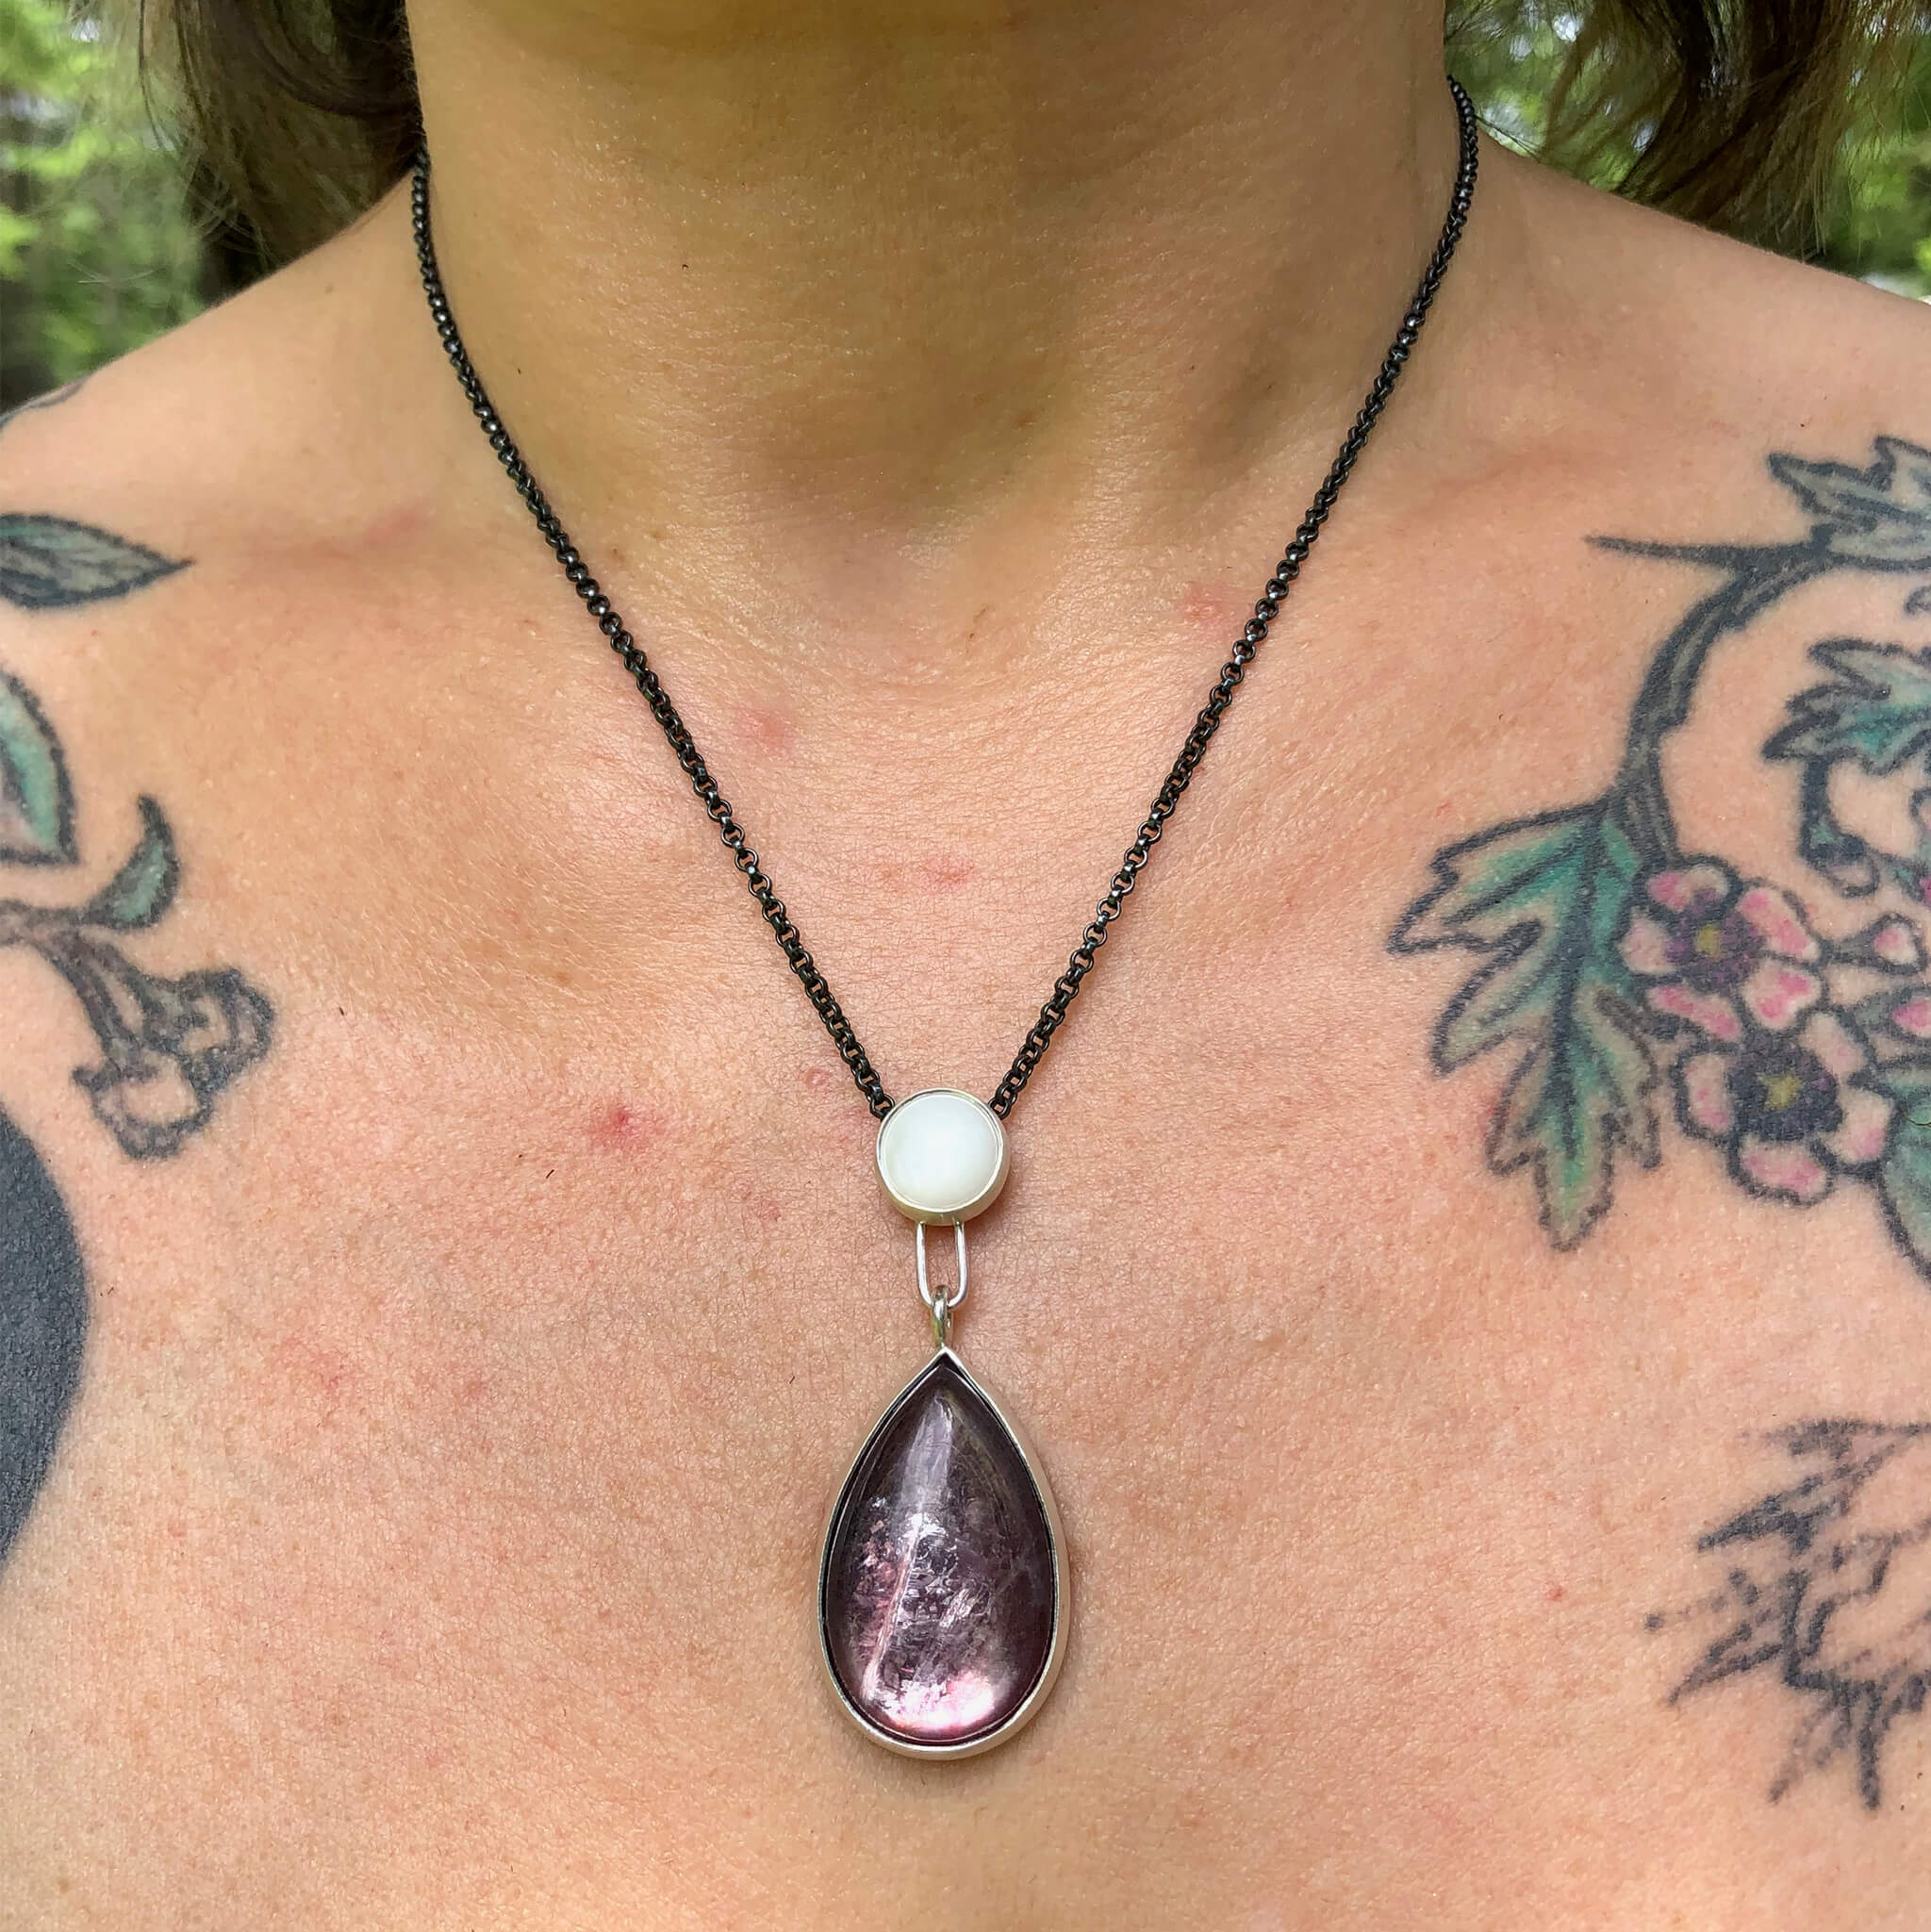 Lepidolite + Mother of Pearl Pendant + Headdress. Set in sterling silver. "Betwixt + Between" collection by Alex Lozier Jewelry + Salicrow.